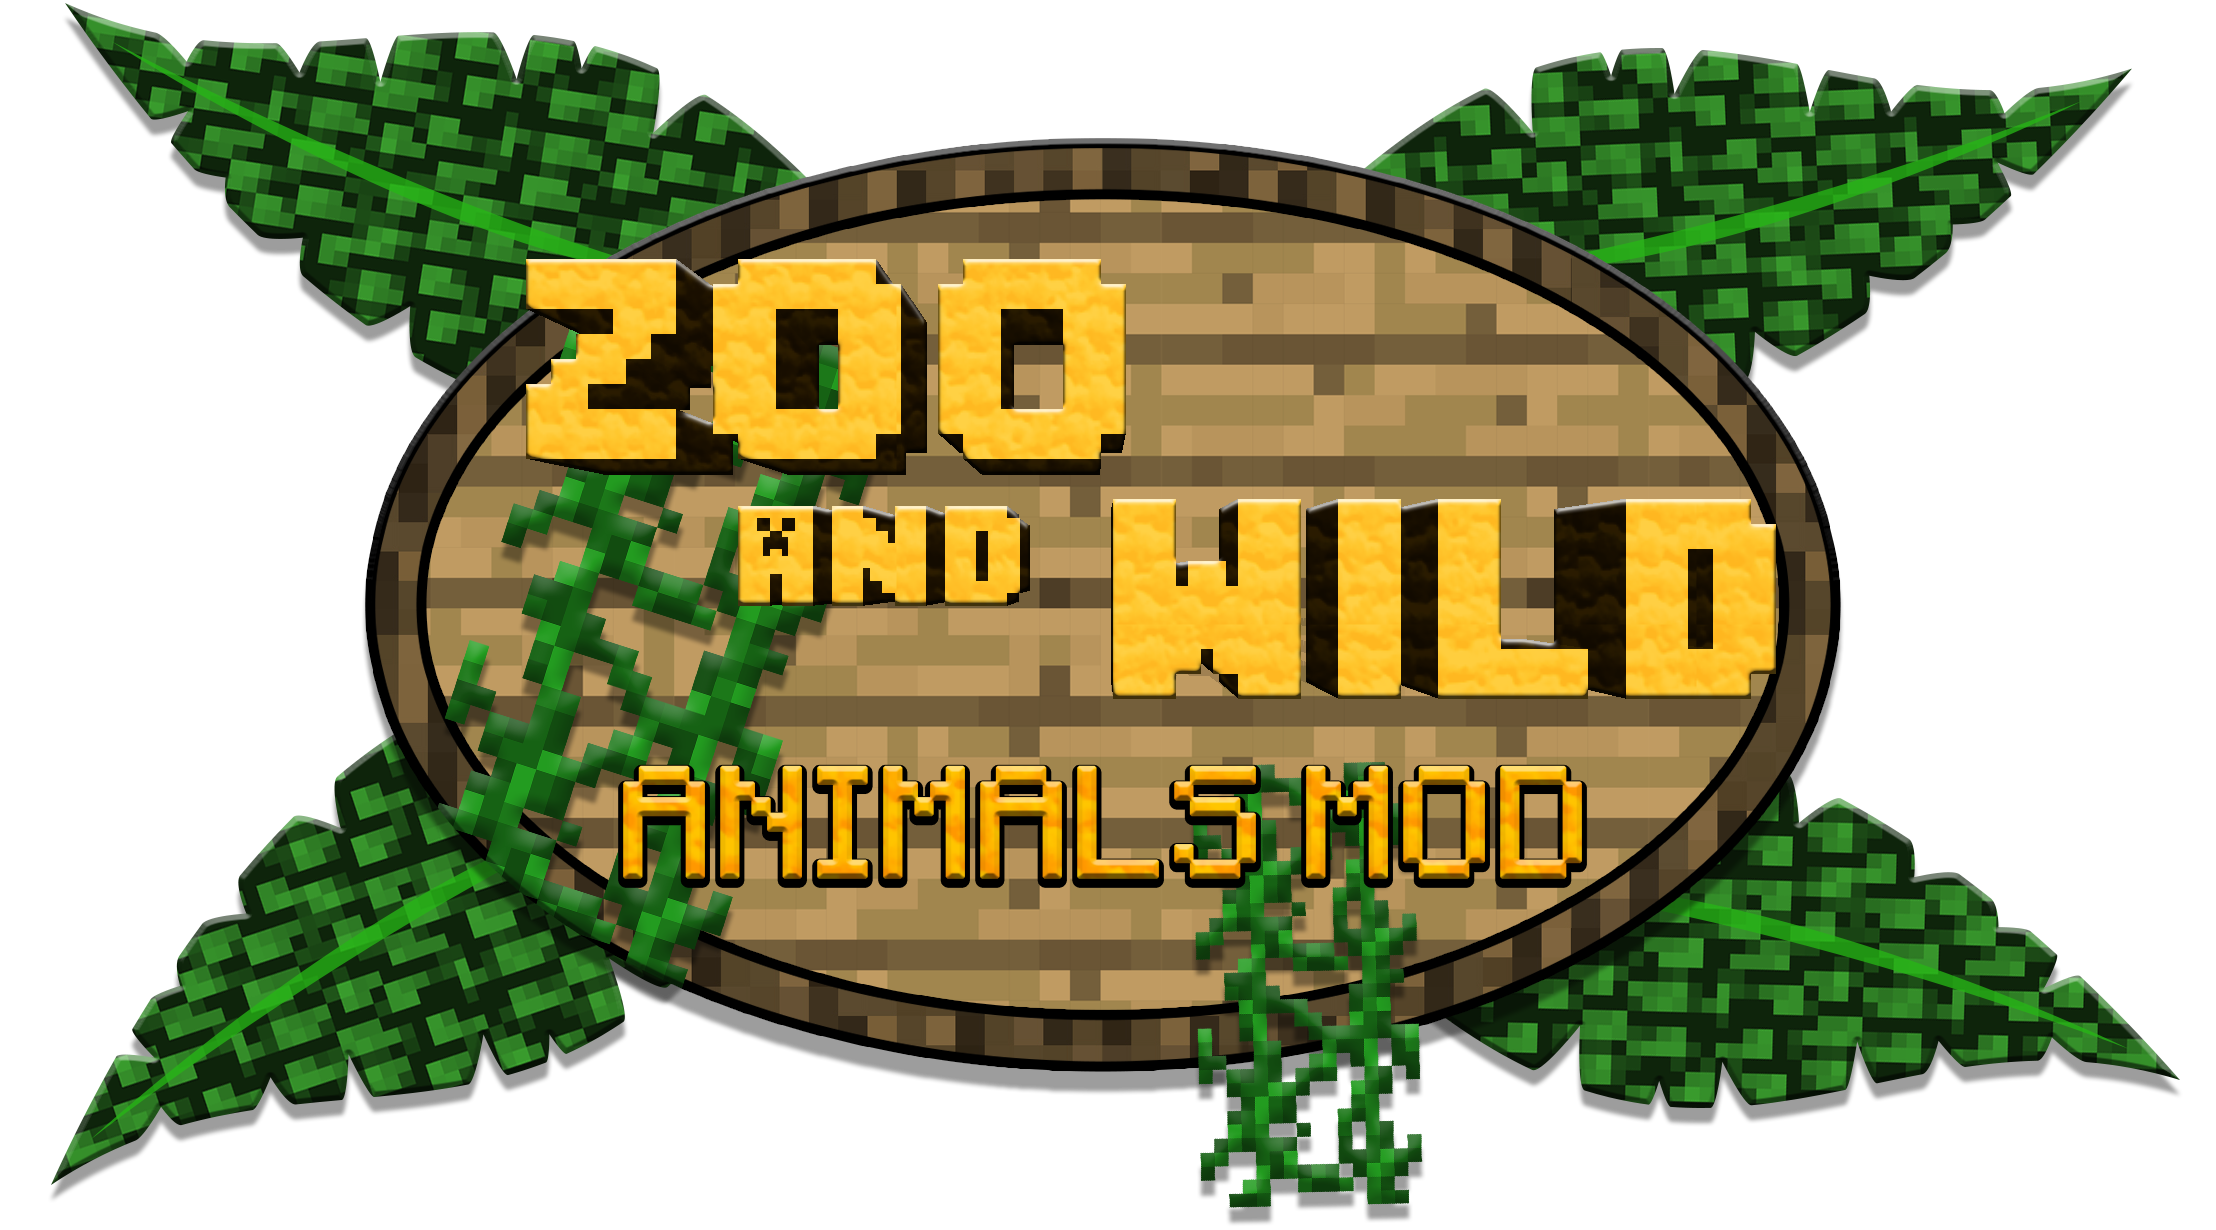 Zoo and Wild Animals Mod: African Adventure Update - WIP Mods - Minecraft  Mods - Mapping and Modding: Java Edition - Minecraft Forum - Minecraft Forum